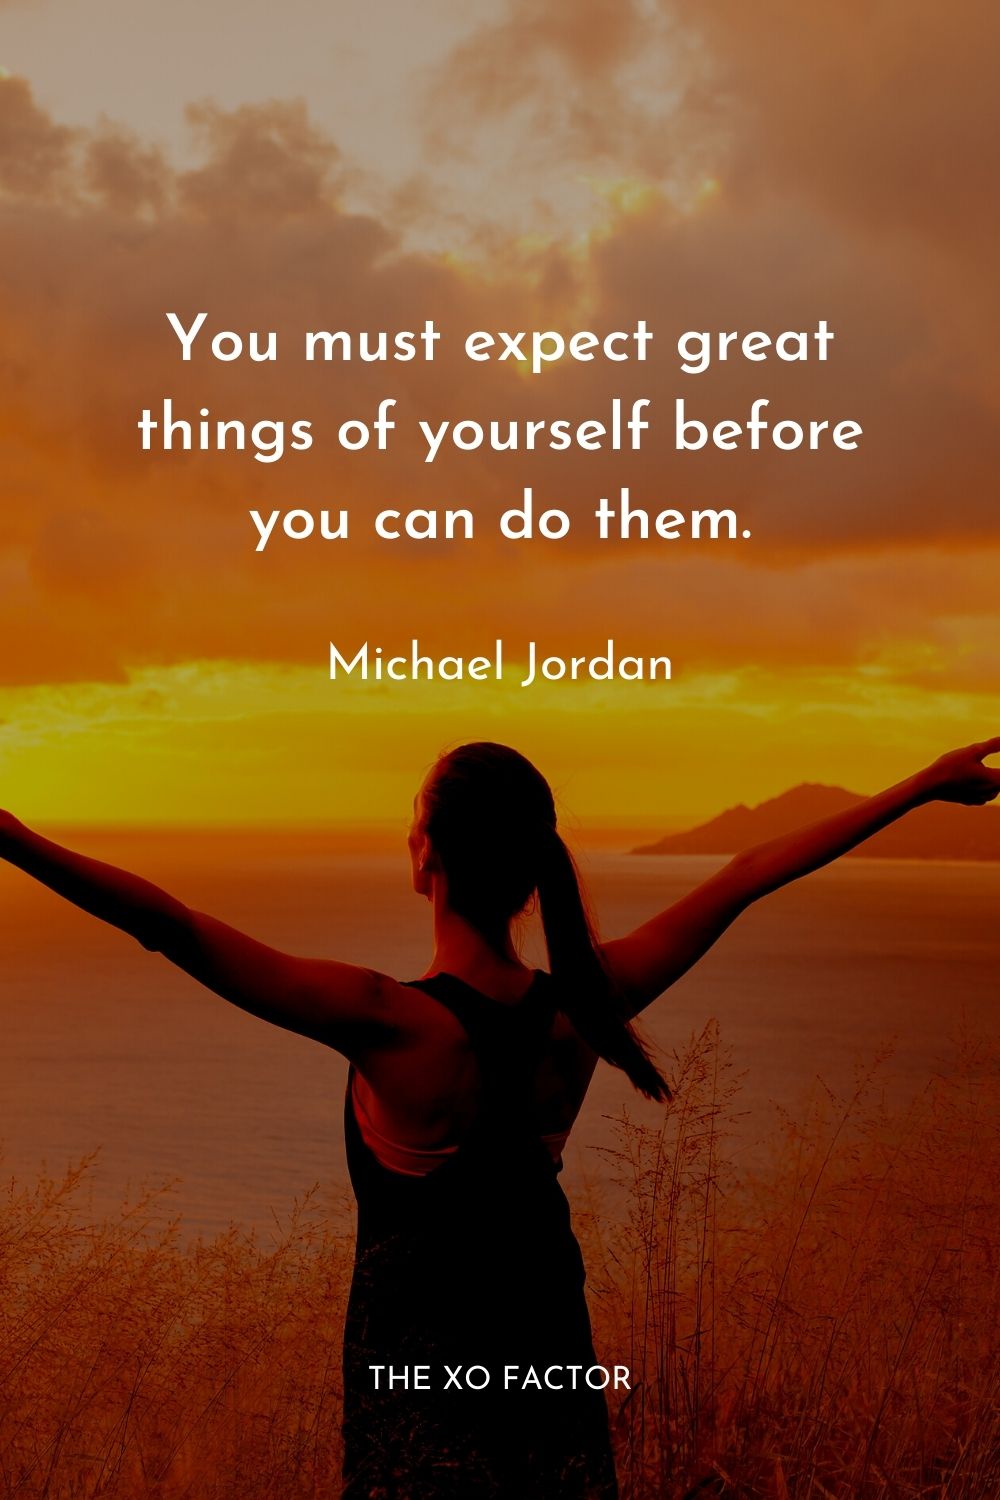 You must expect great things of yourself before you can do them.